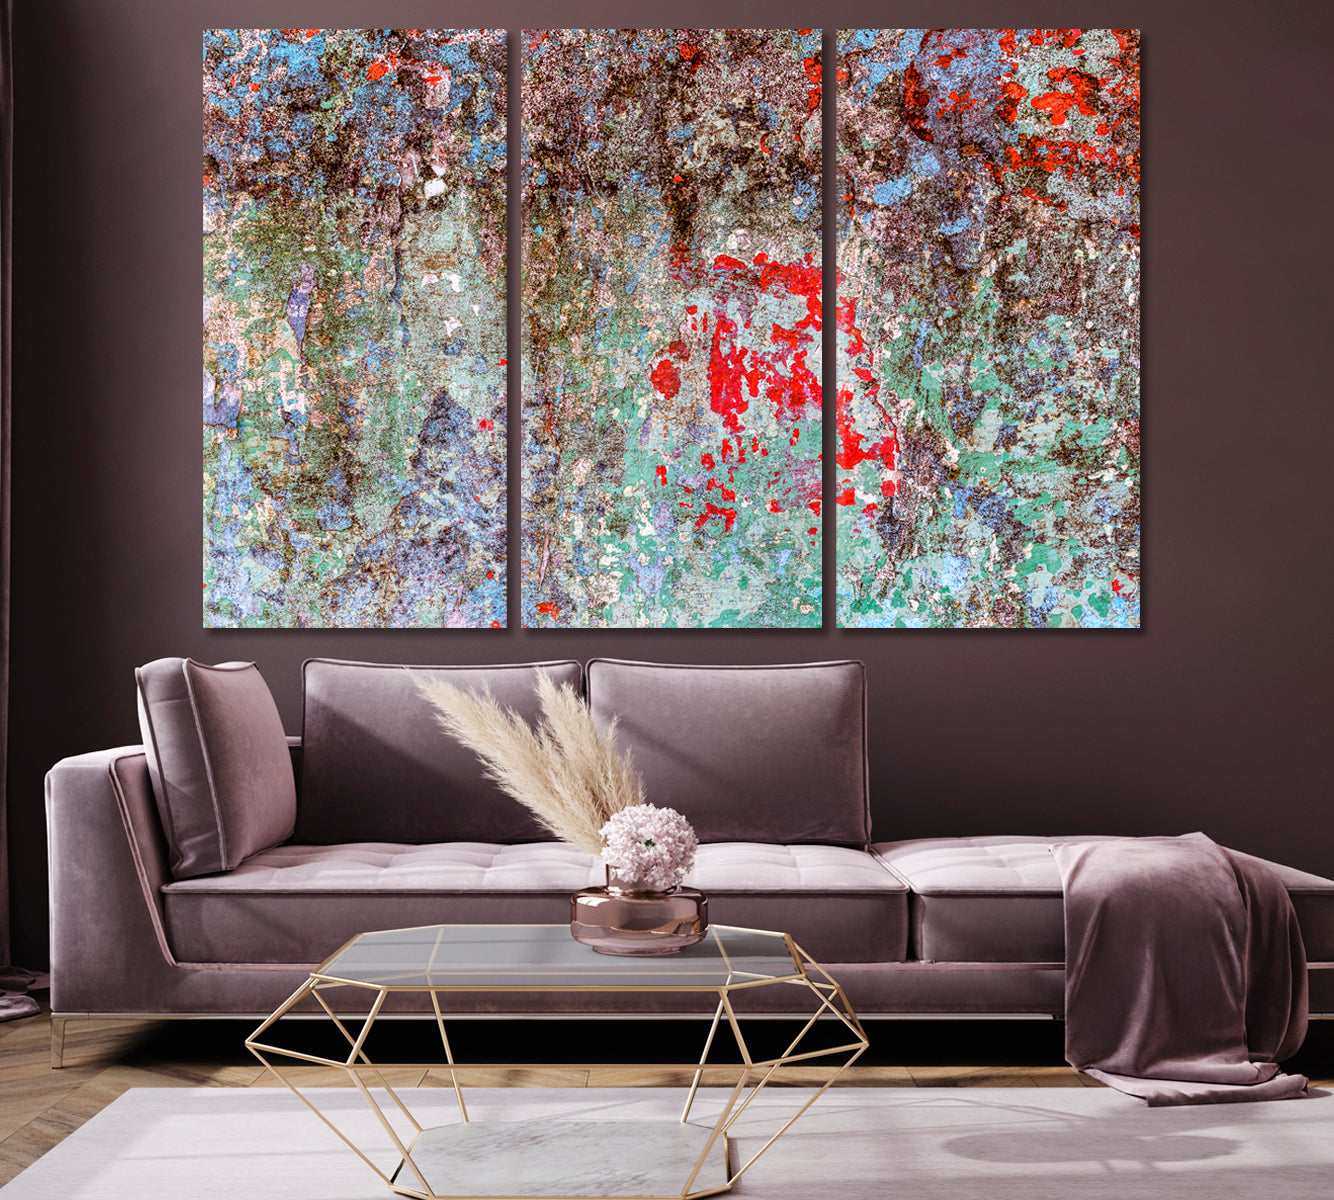 Abstract Cracked Wall Effect Canvas Print-Canvas Print-CetArt-1 Panel-24x16 inches-CetArt